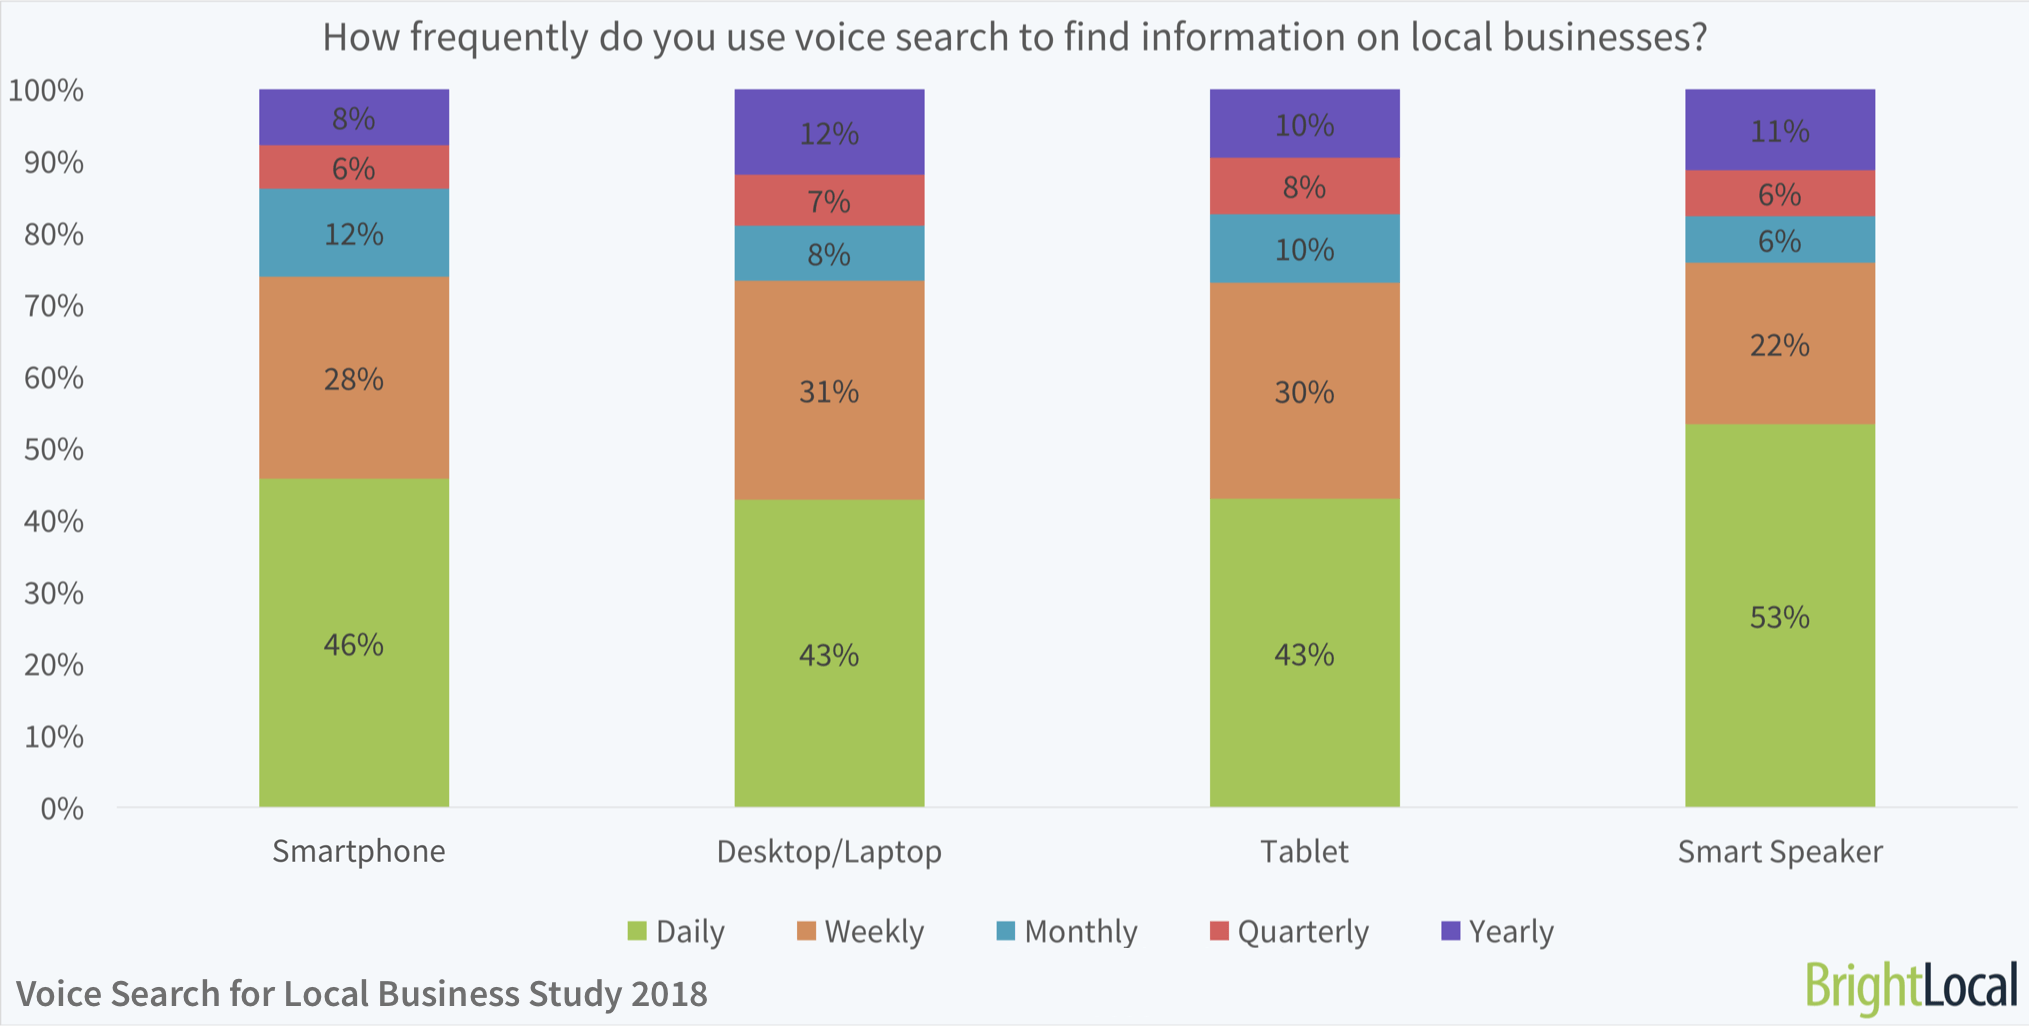 Smart speakers, smartphones, desktop/laptop, tablet: How frequently do you use voice search to find information on local businesses? | BrightLocal Voice Search for Local Business Study